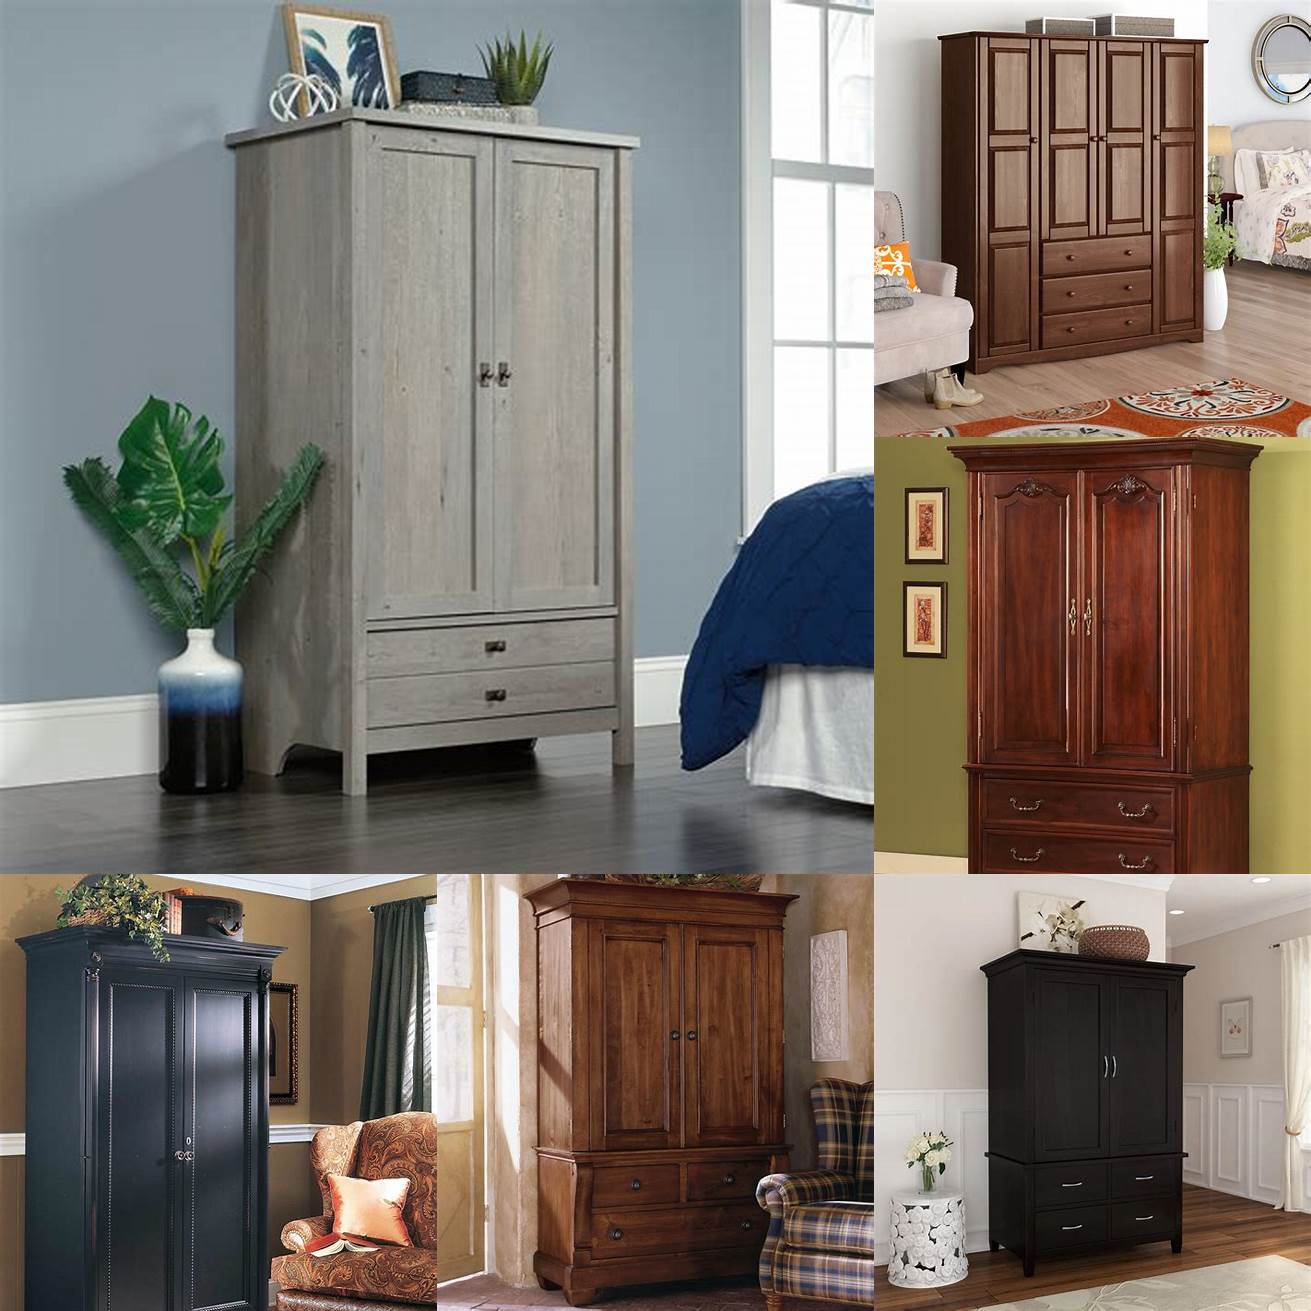 Price Set a budget and choose an armoire that fits within your budget